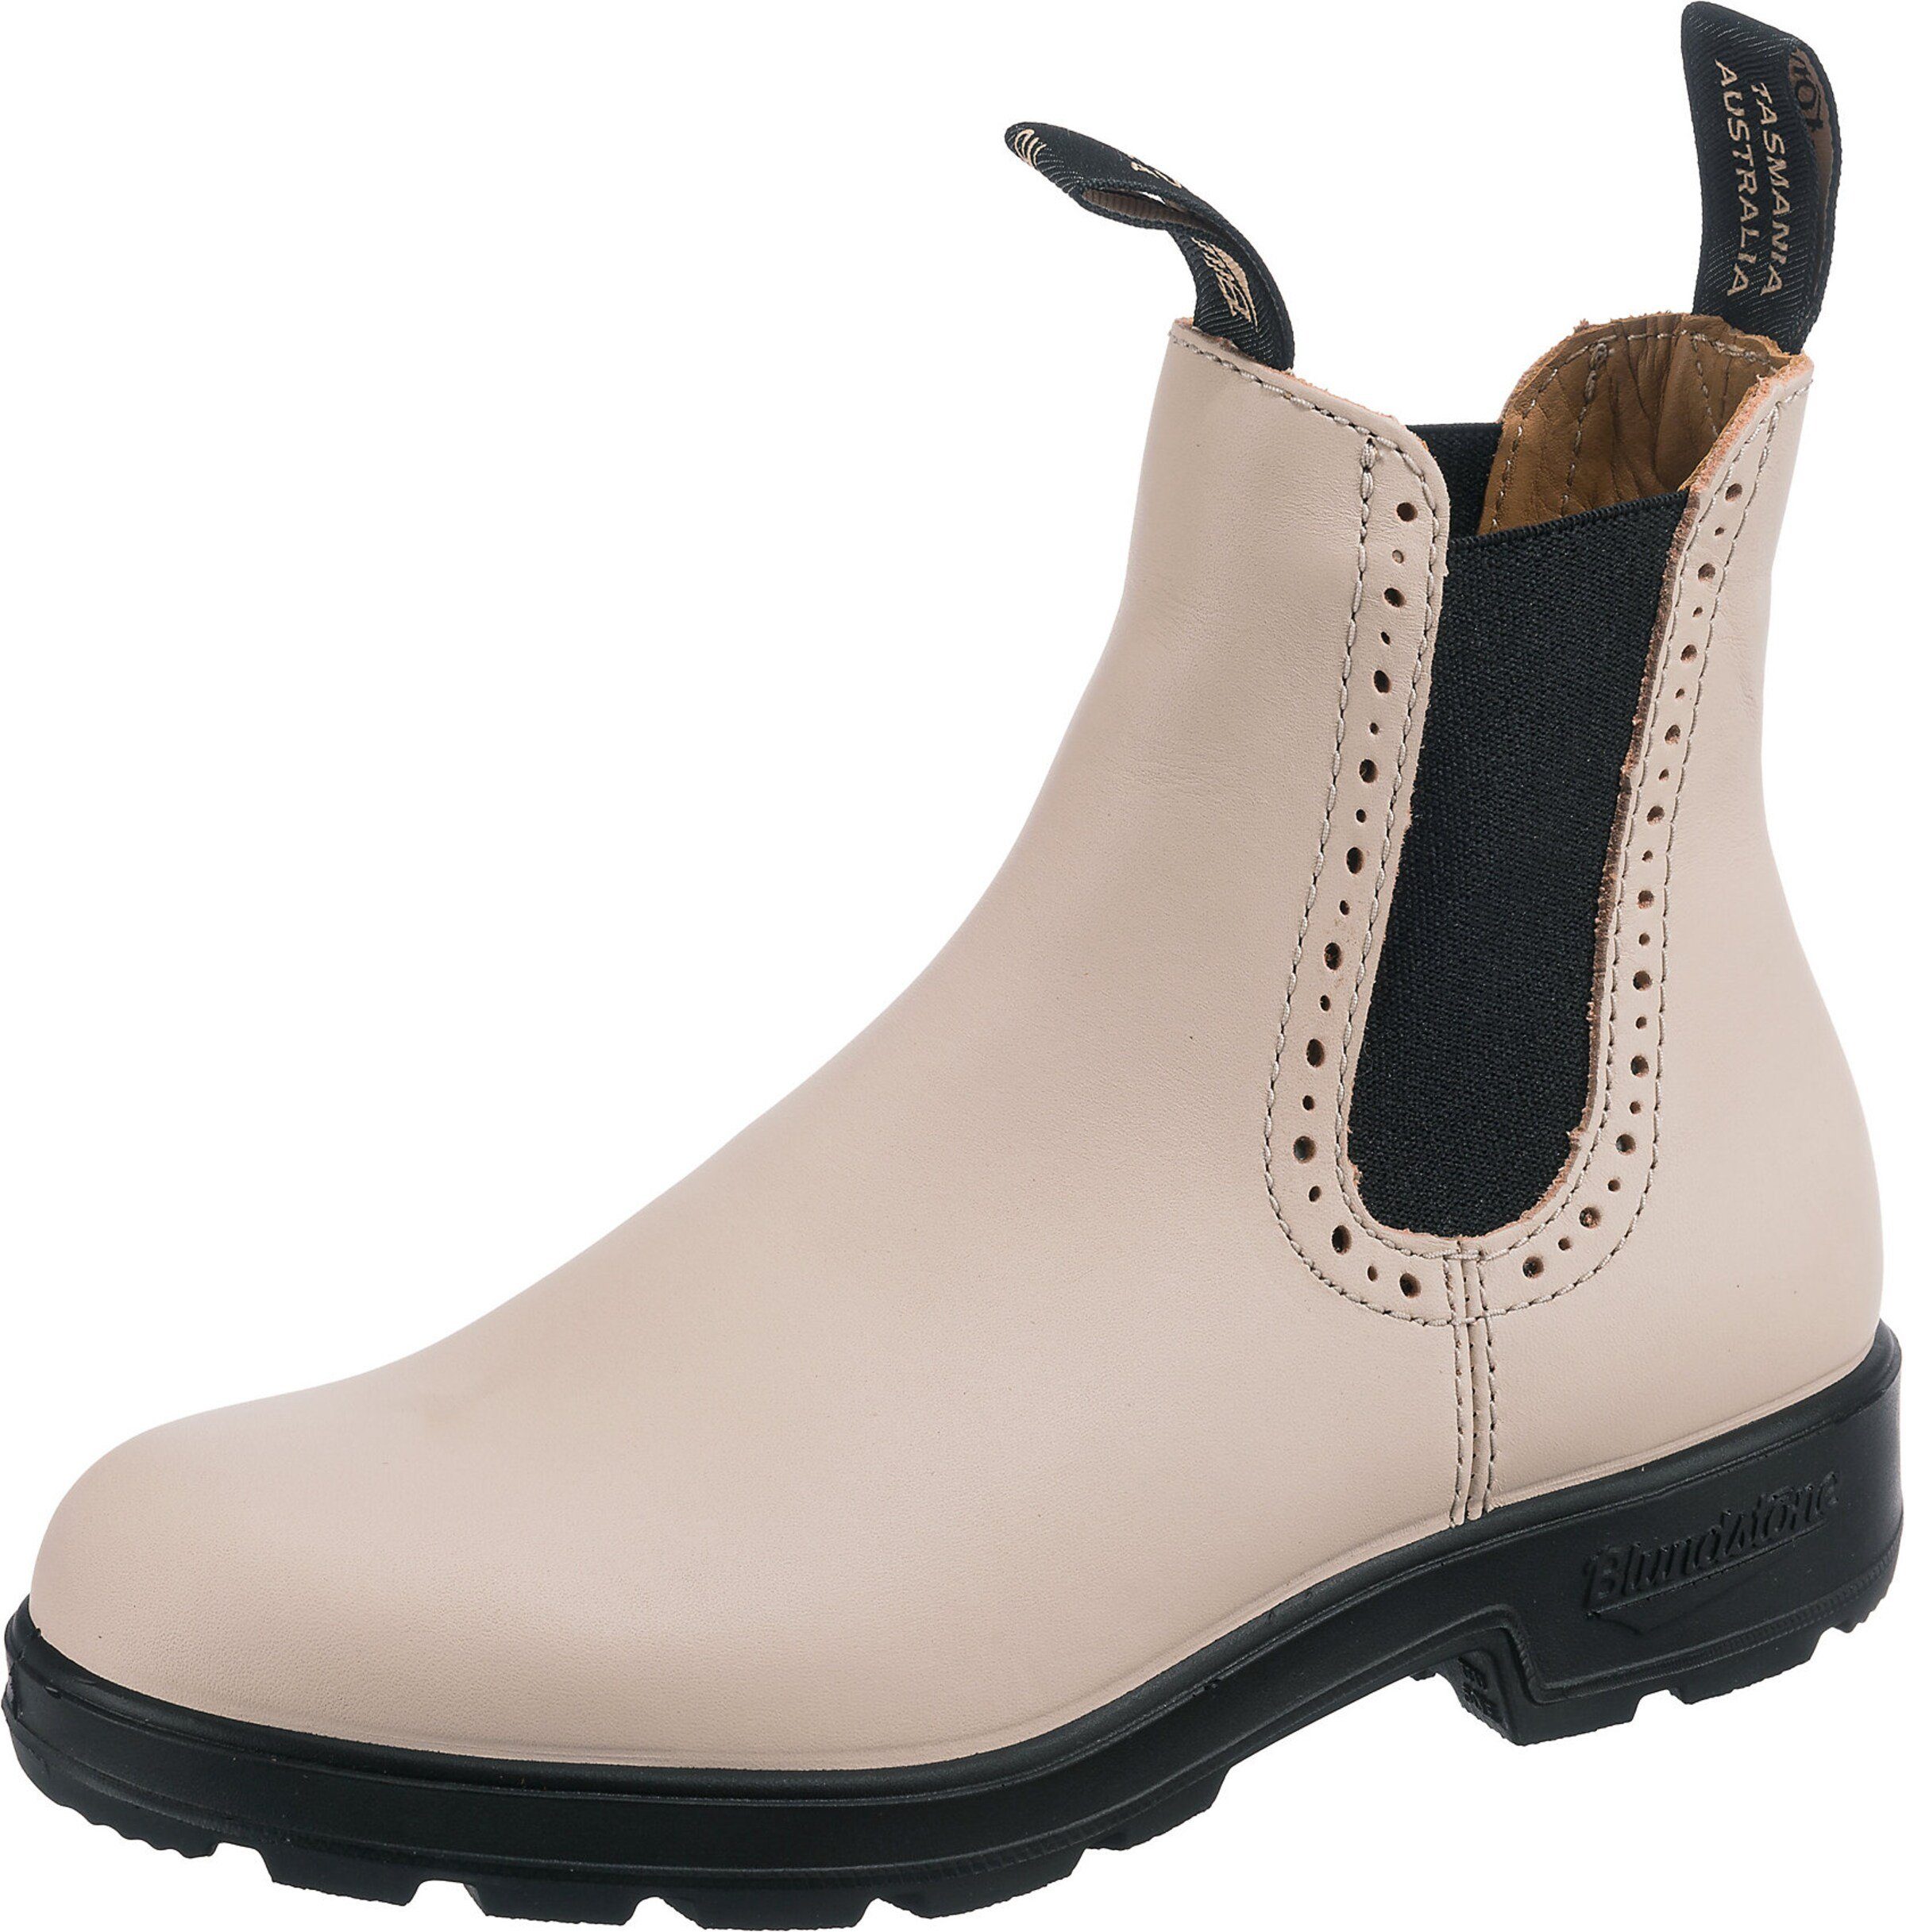 Chelseaboots (1-tlg) Blundstone